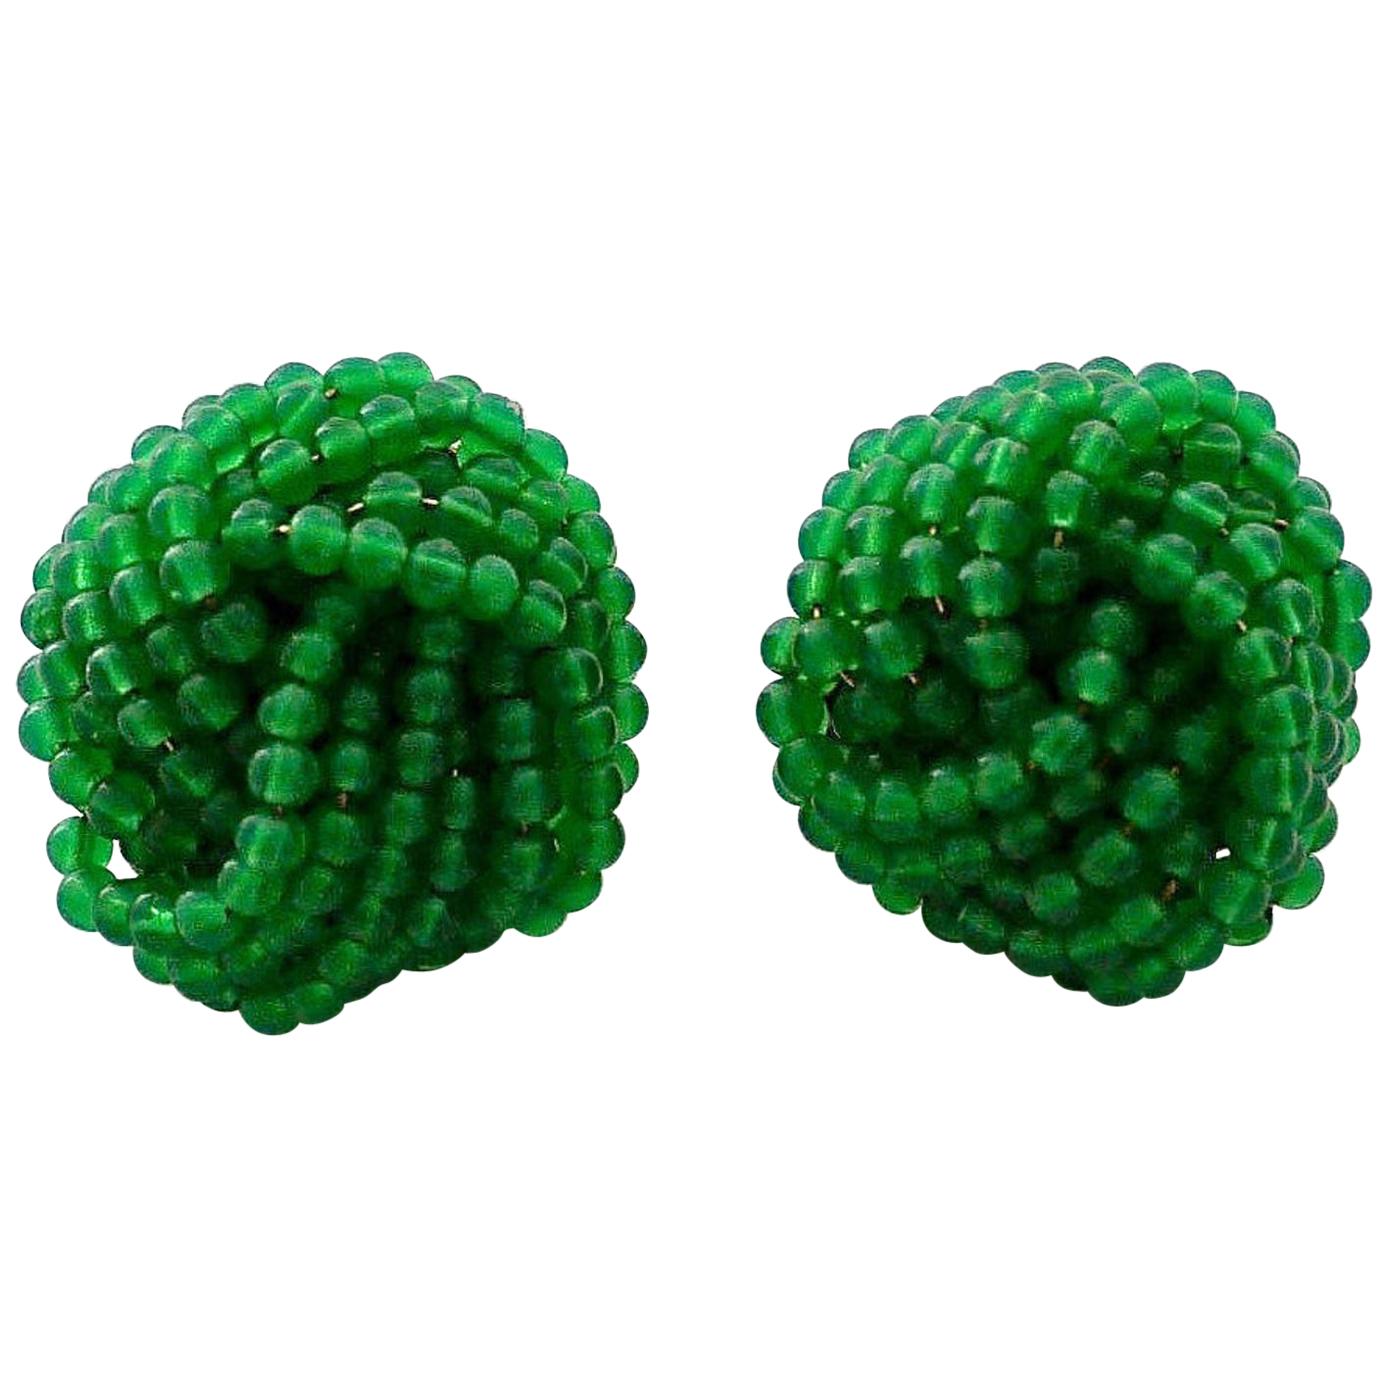 Vintage 1967 CHRISTIAN DIOR Knotted Emerald Glass Beads Earrings For Sale